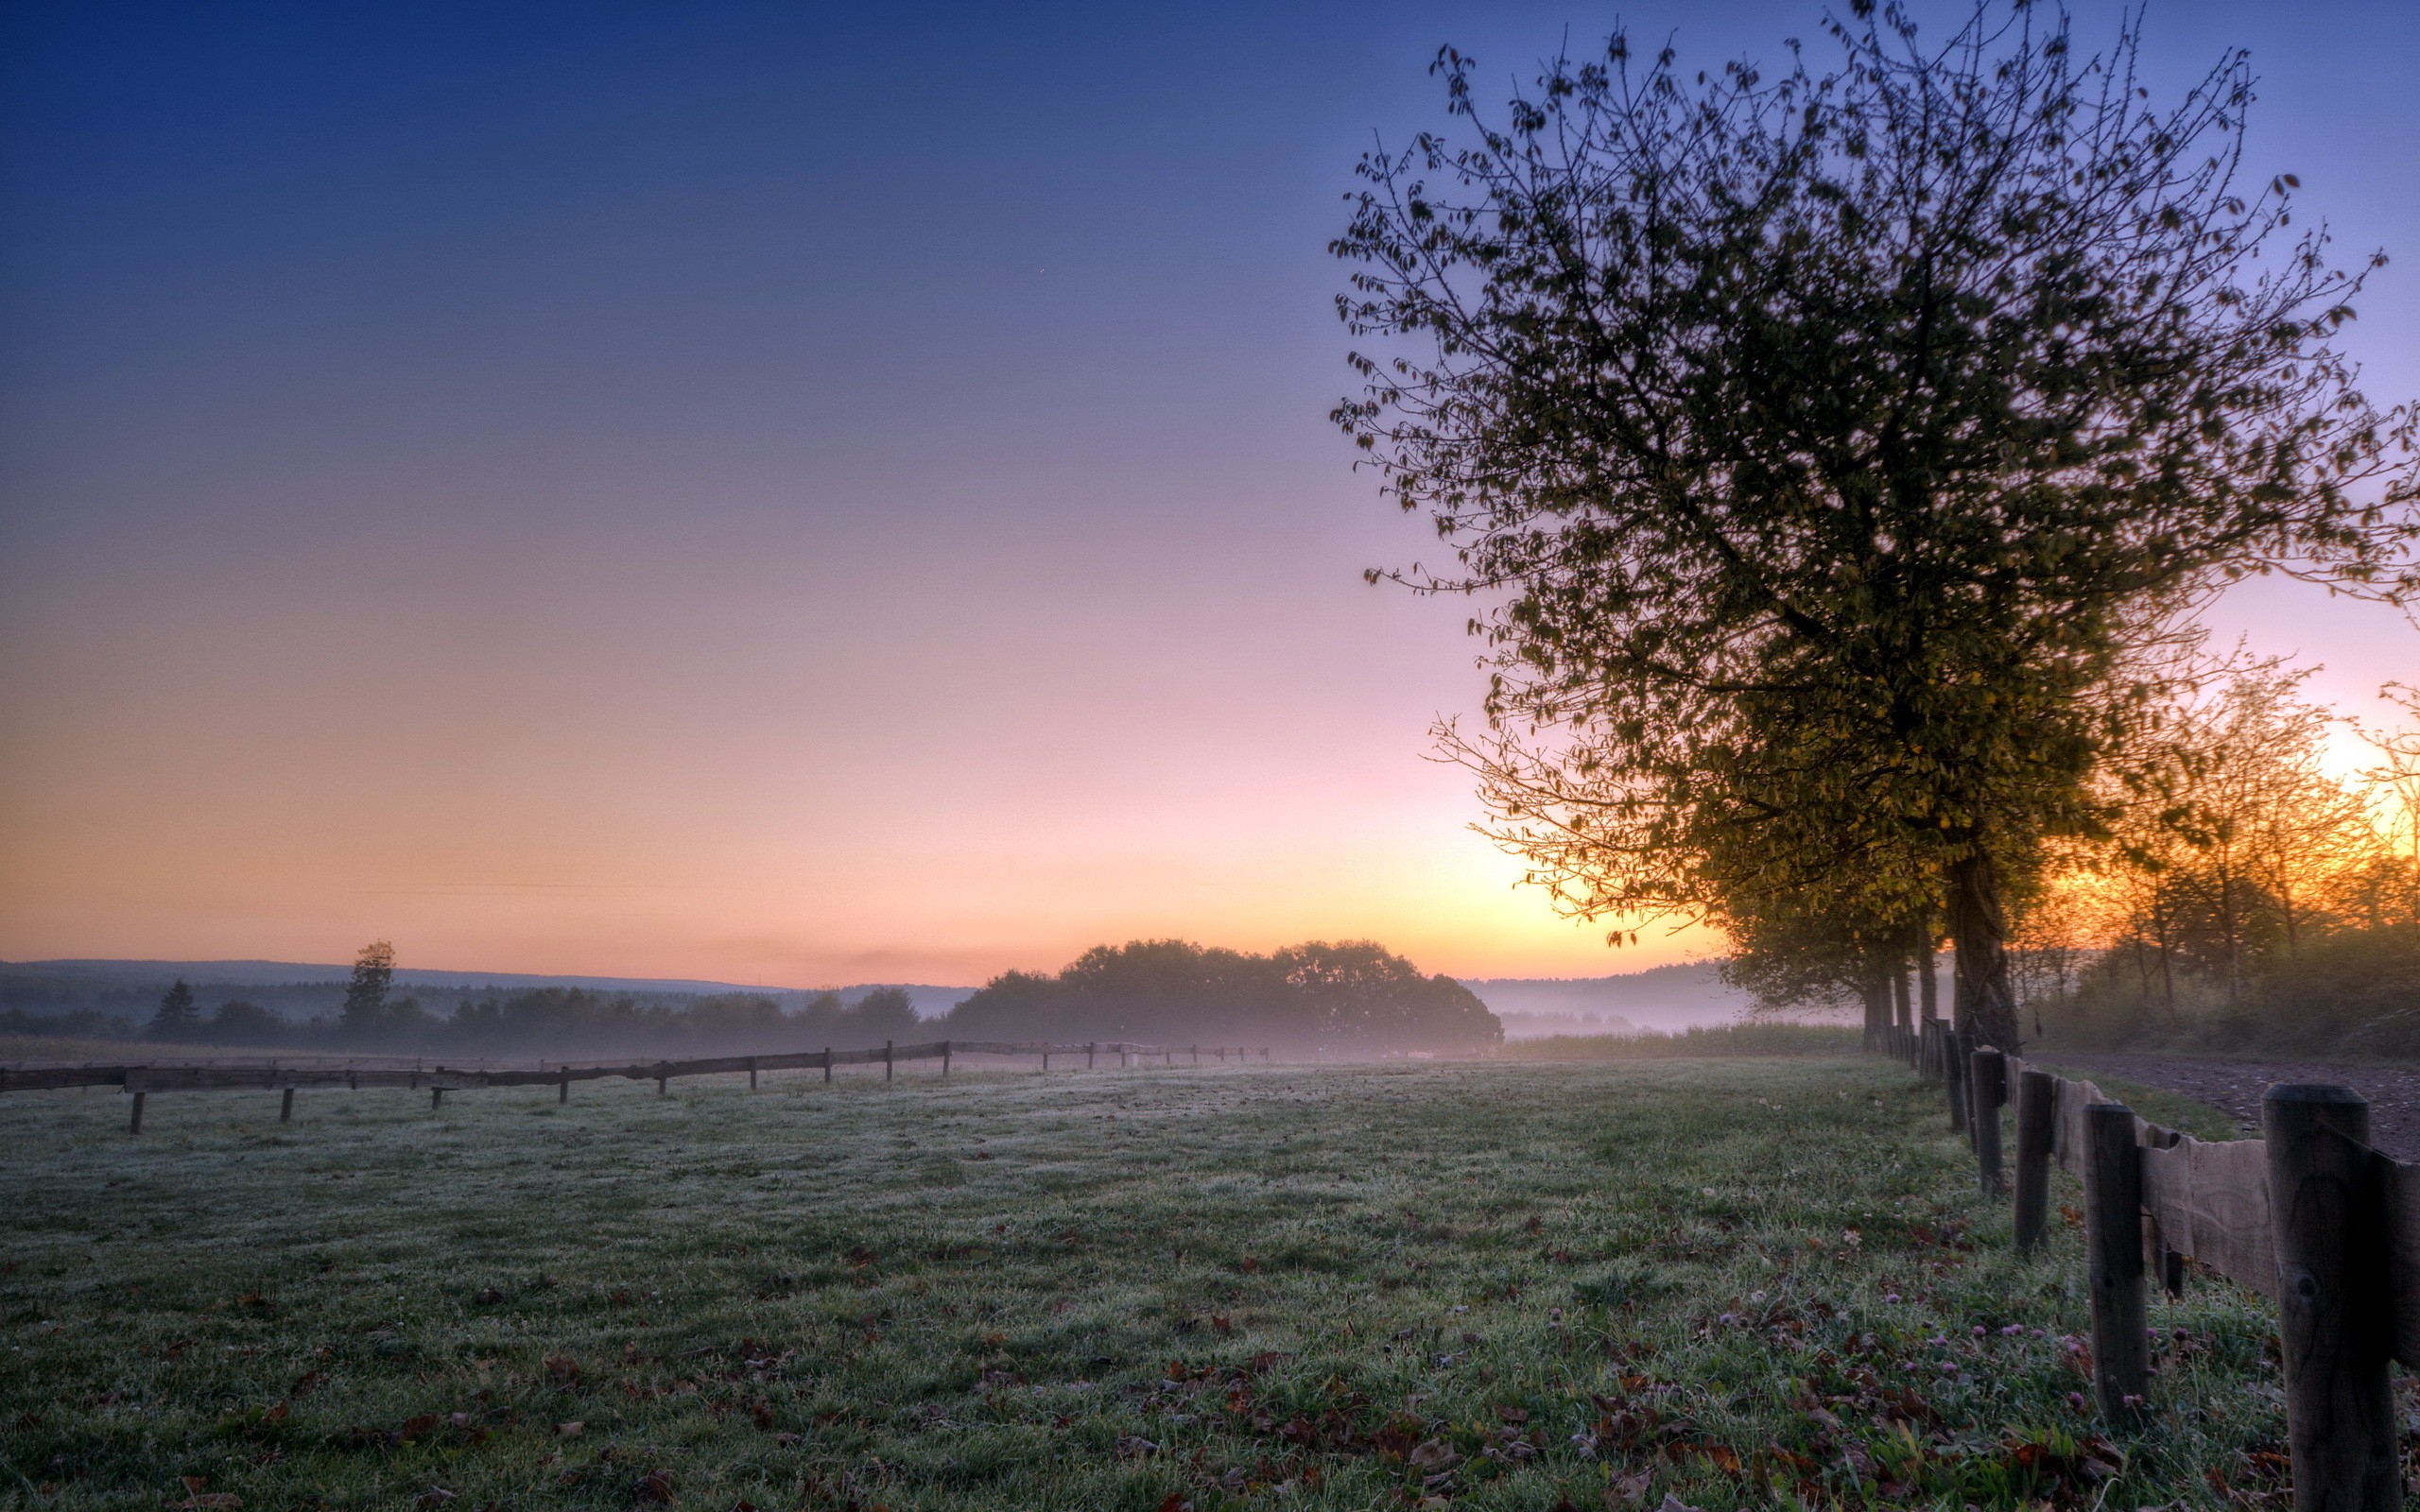 General 2560x1600 nature sunset mist trees landscape field outdoors